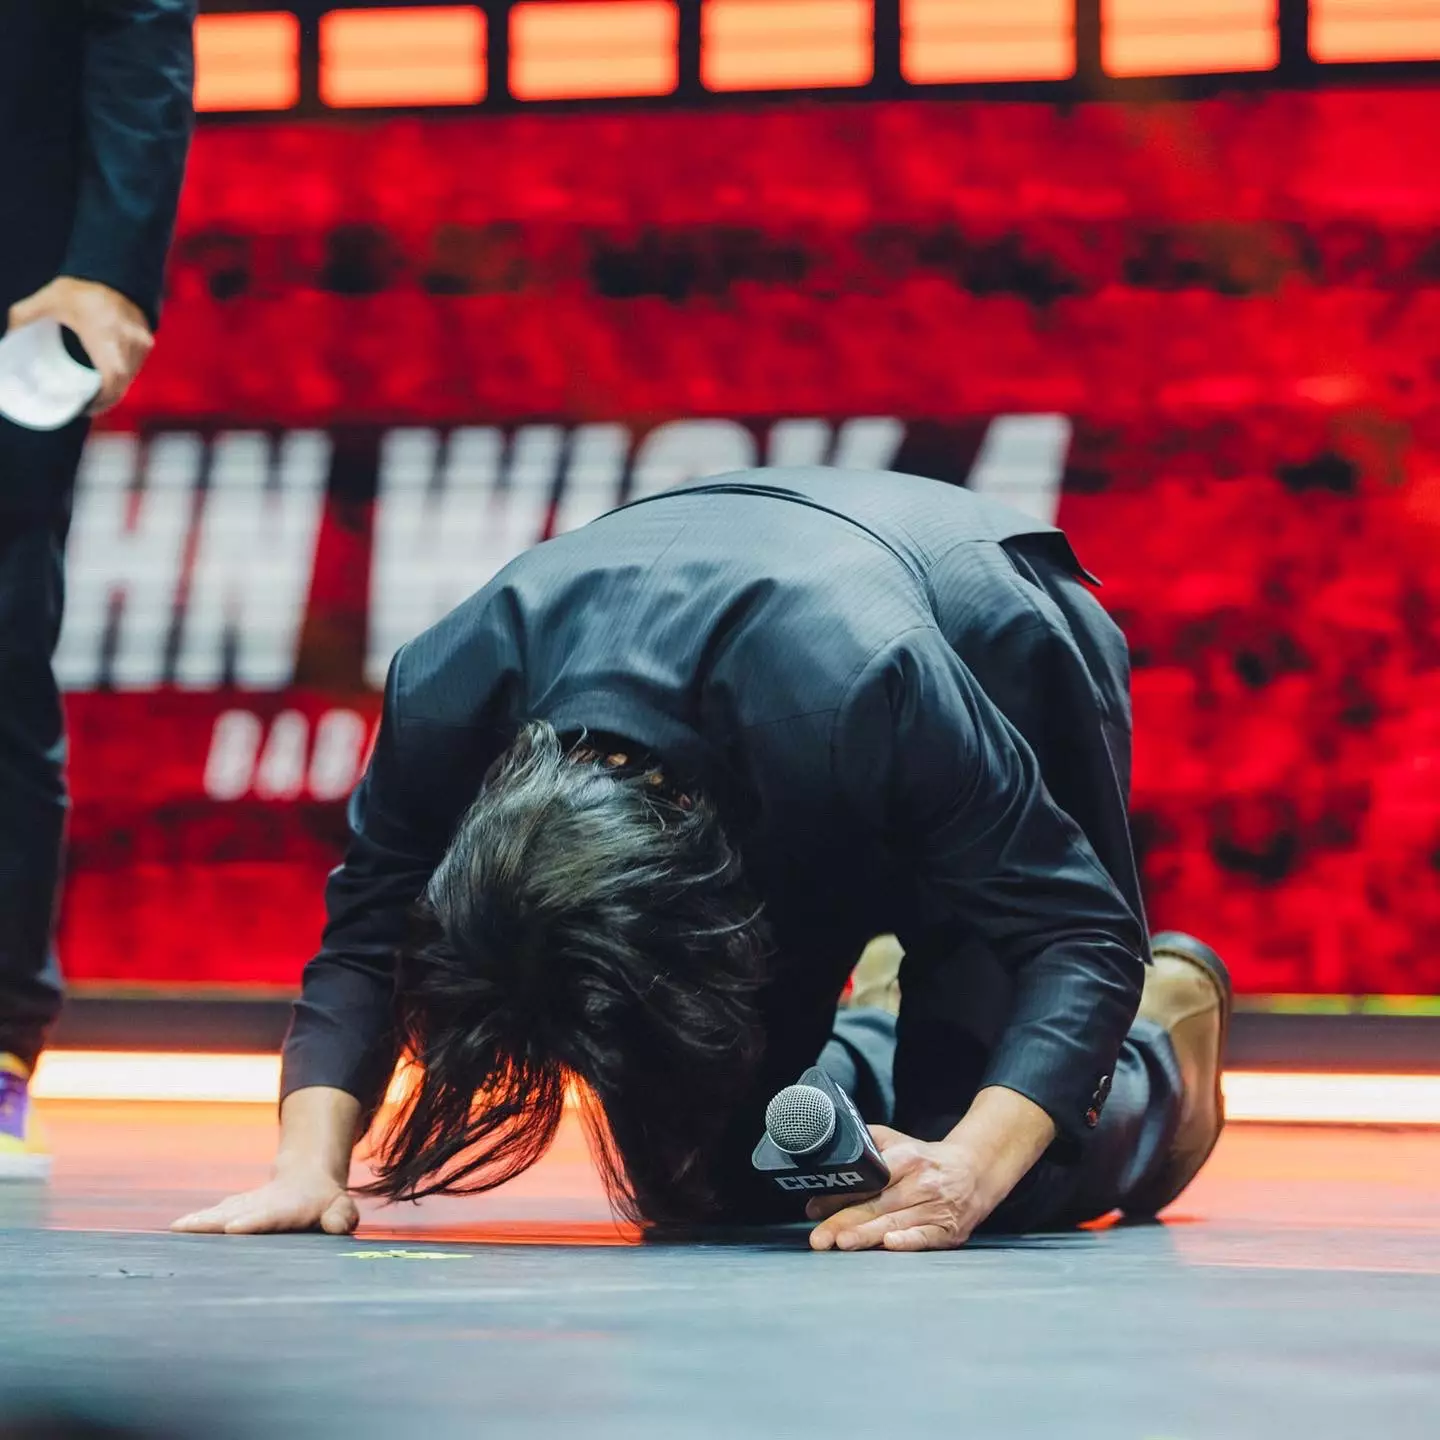 Keanu got on his knees as he received a standing ovation.